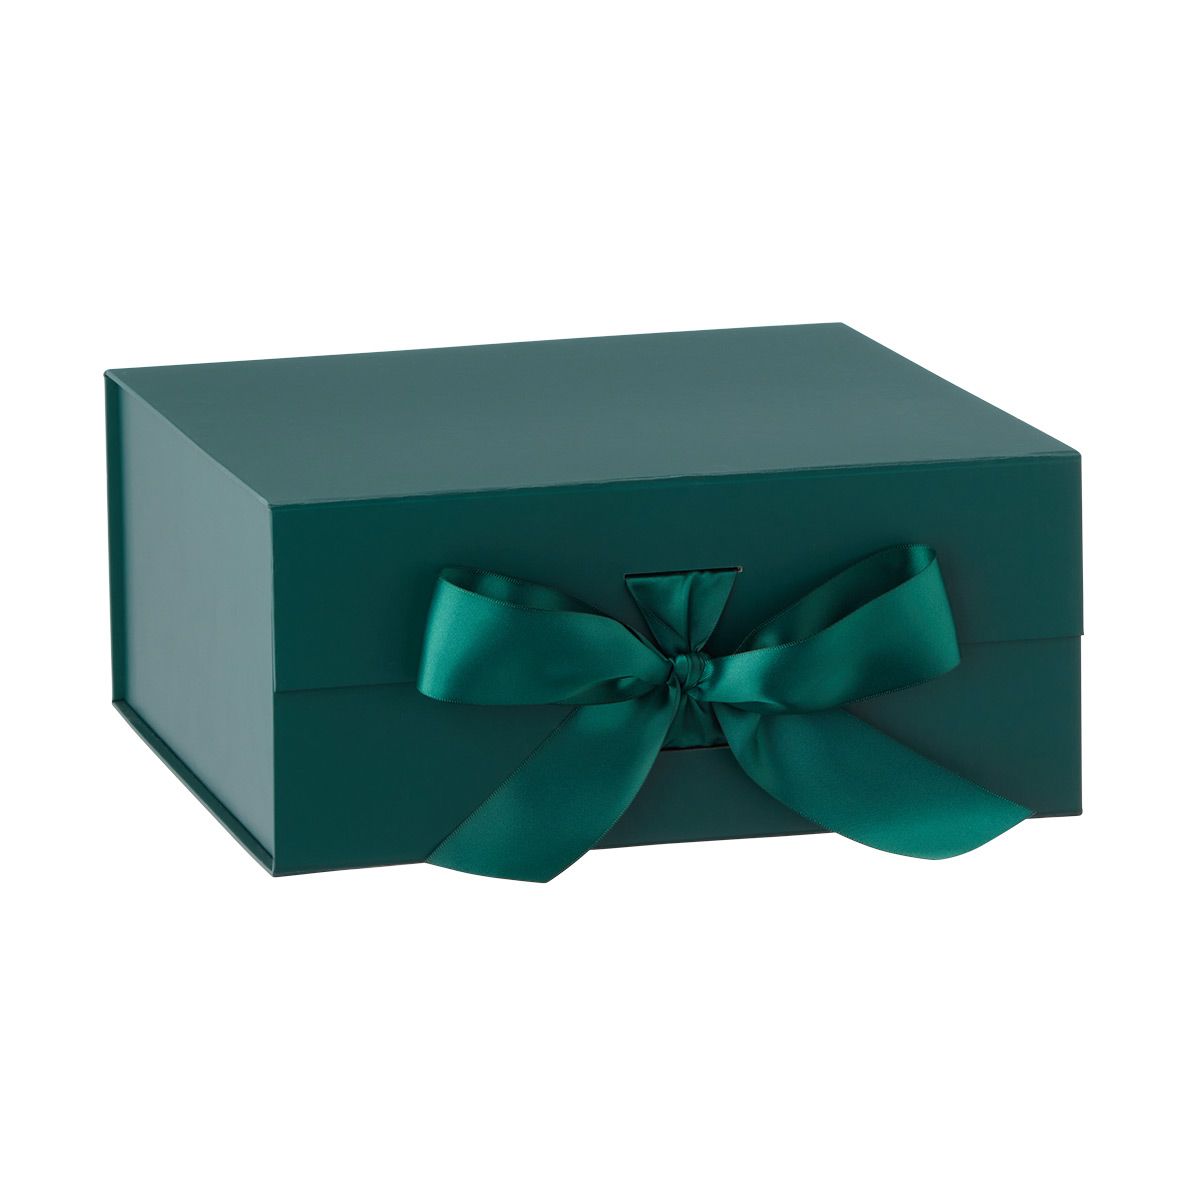 Dark Green Collapsible Gift Boxes with Bow | The Container Store